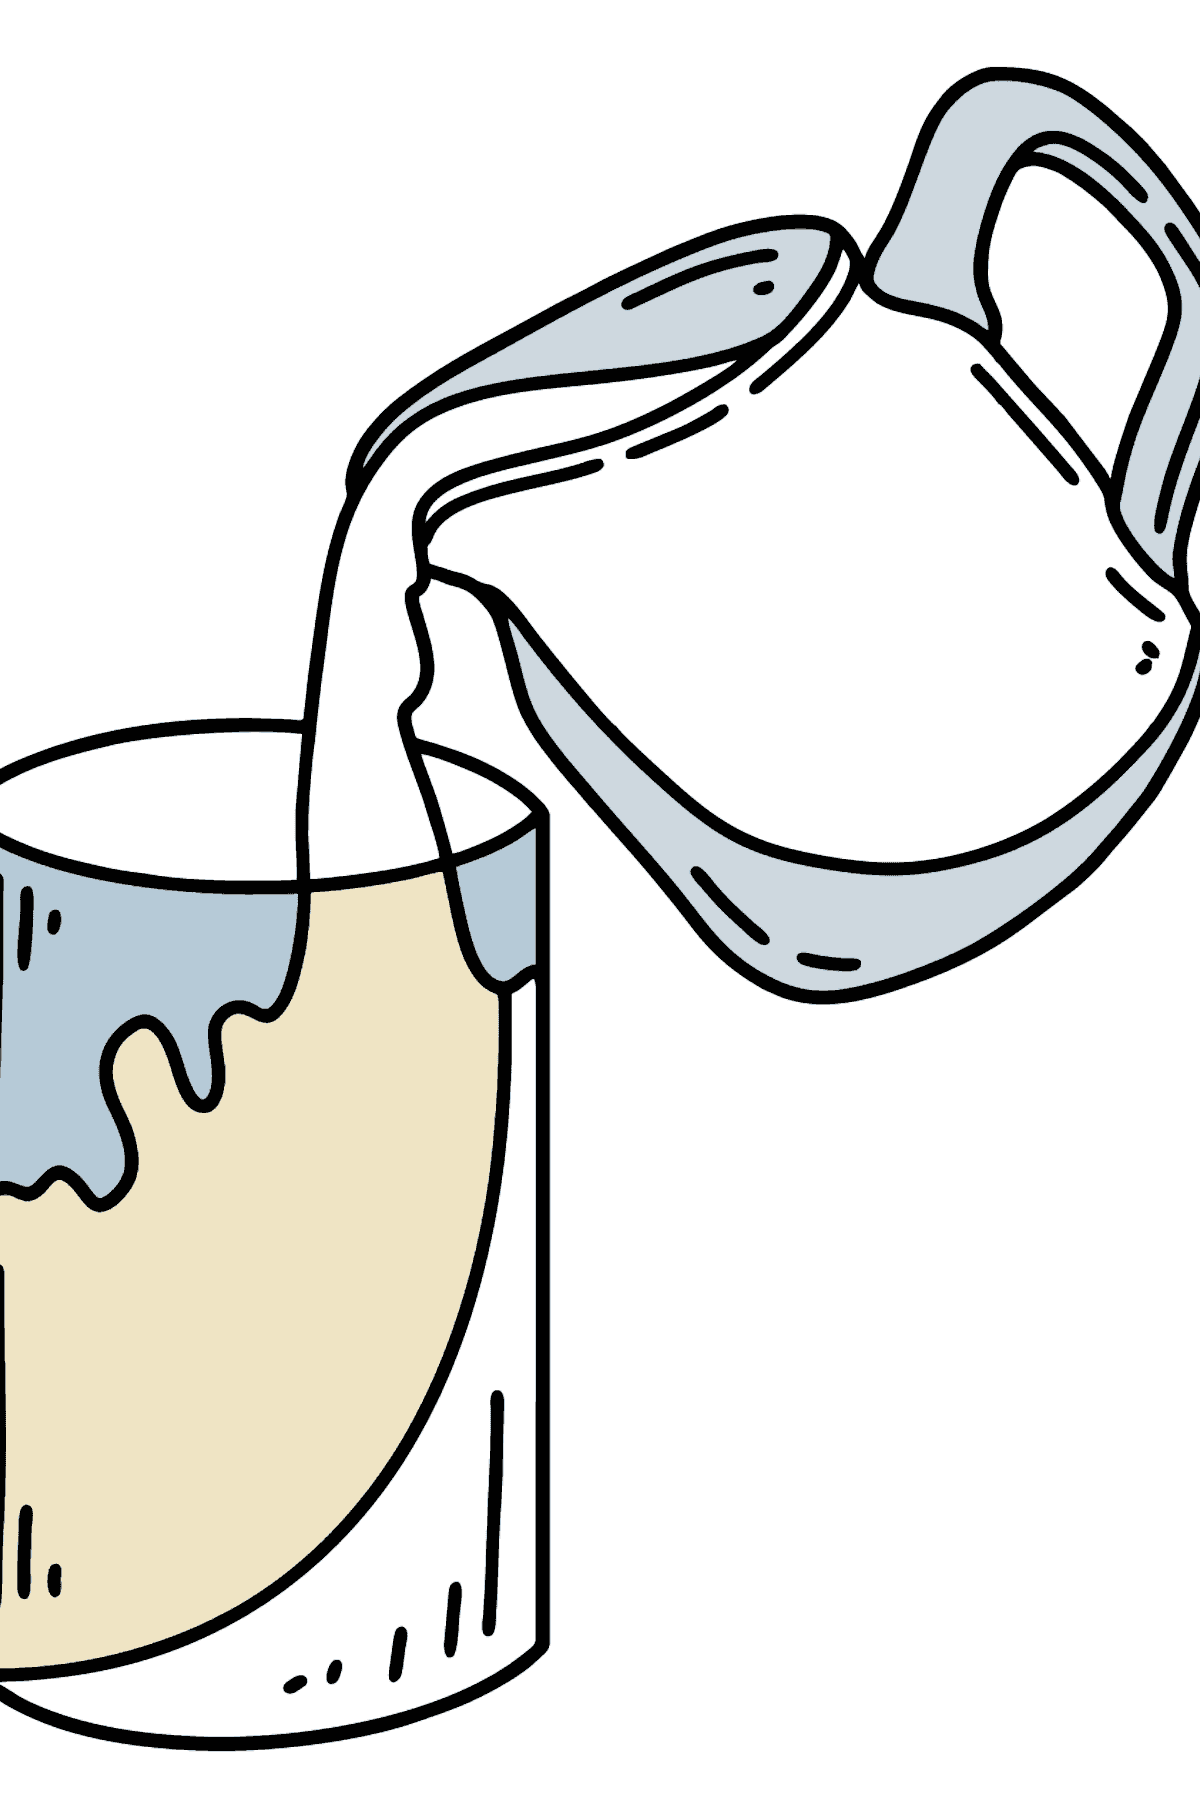 Milk and Milk Jug coloring page - Coloring Pages for Kids